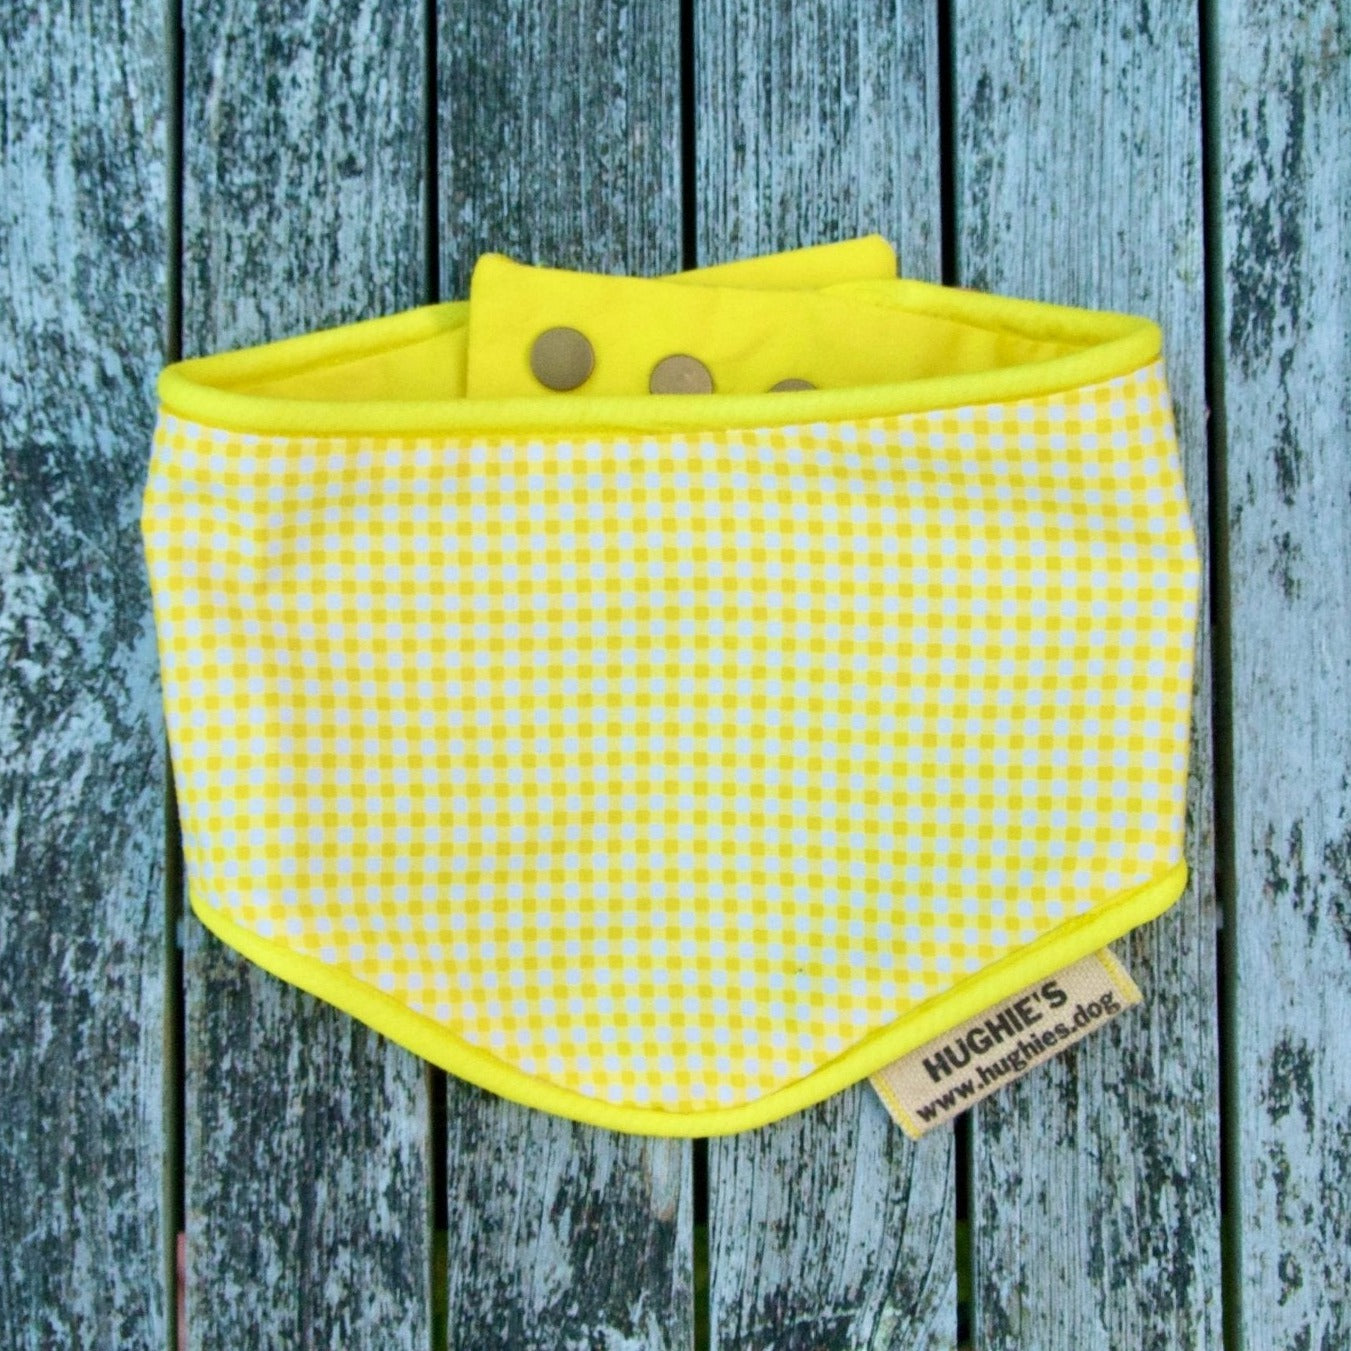 yellow and white gingham bandana on a wooden surface.